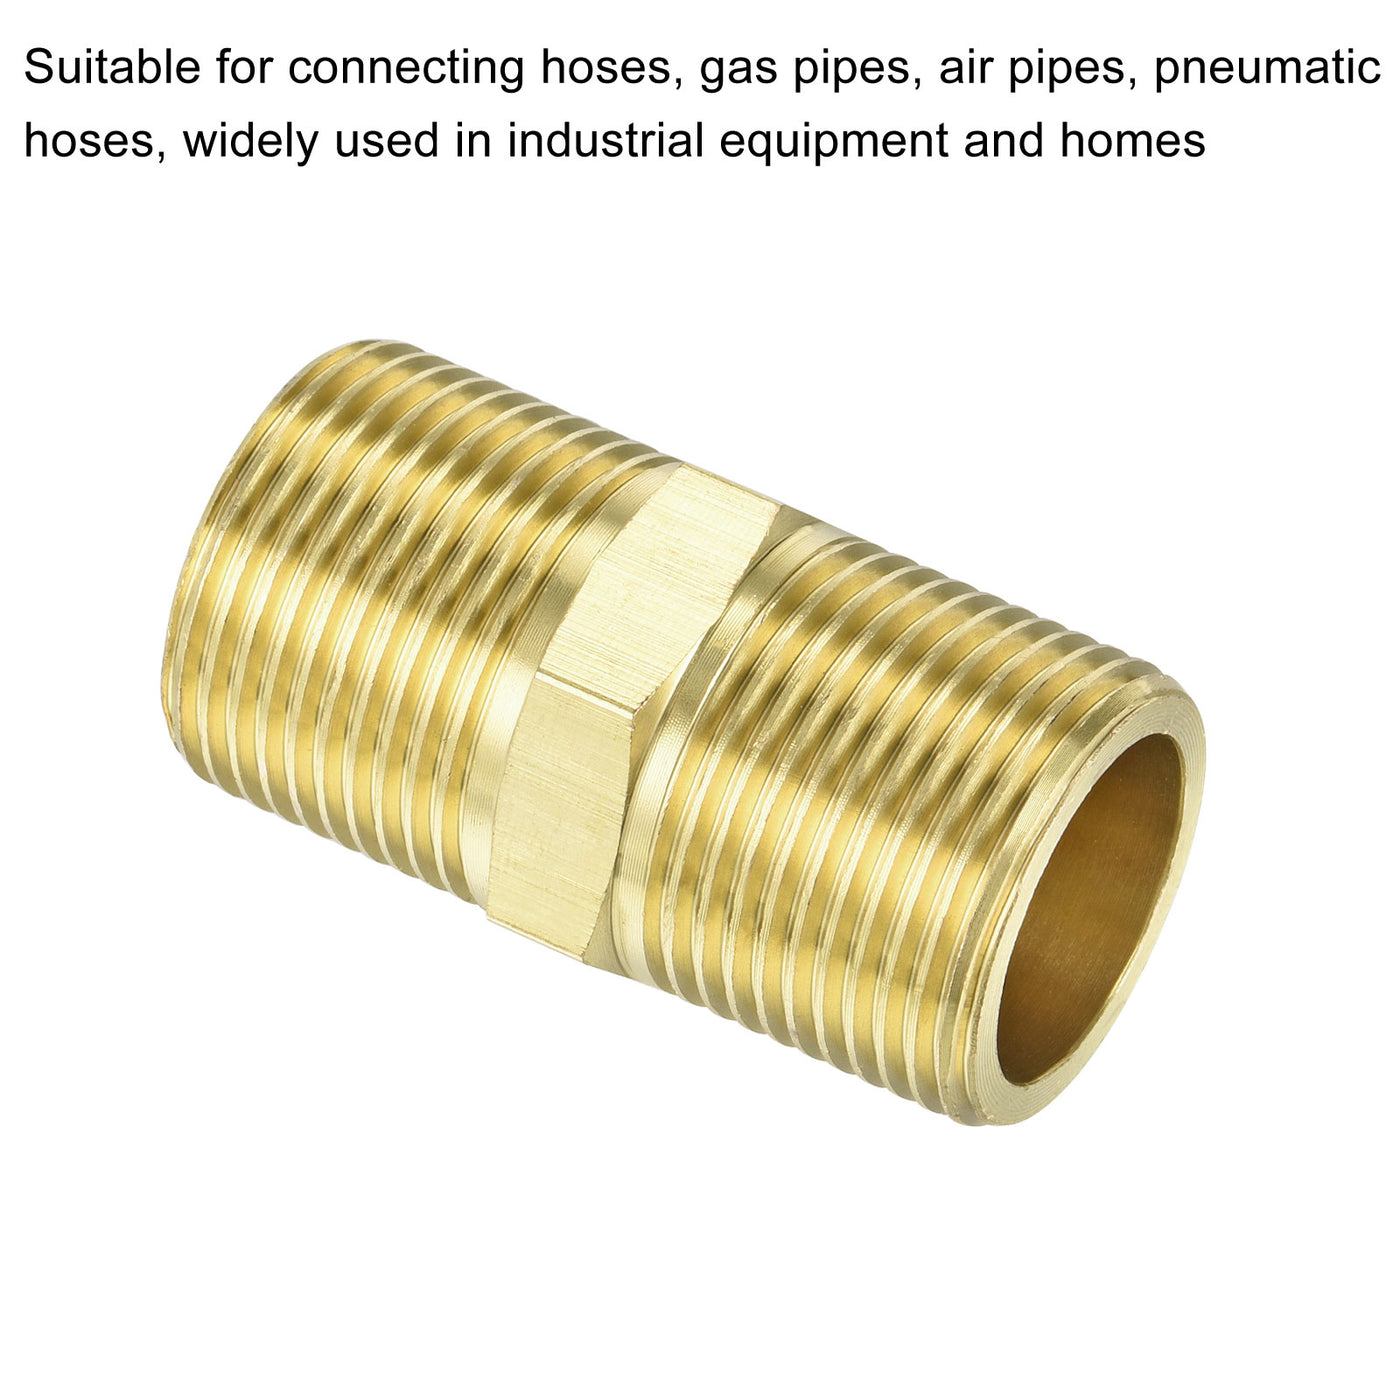 Harfington Brass Pipe Fitting G3/4 Male Thread 50mm Hex Connector Pipe Adapter